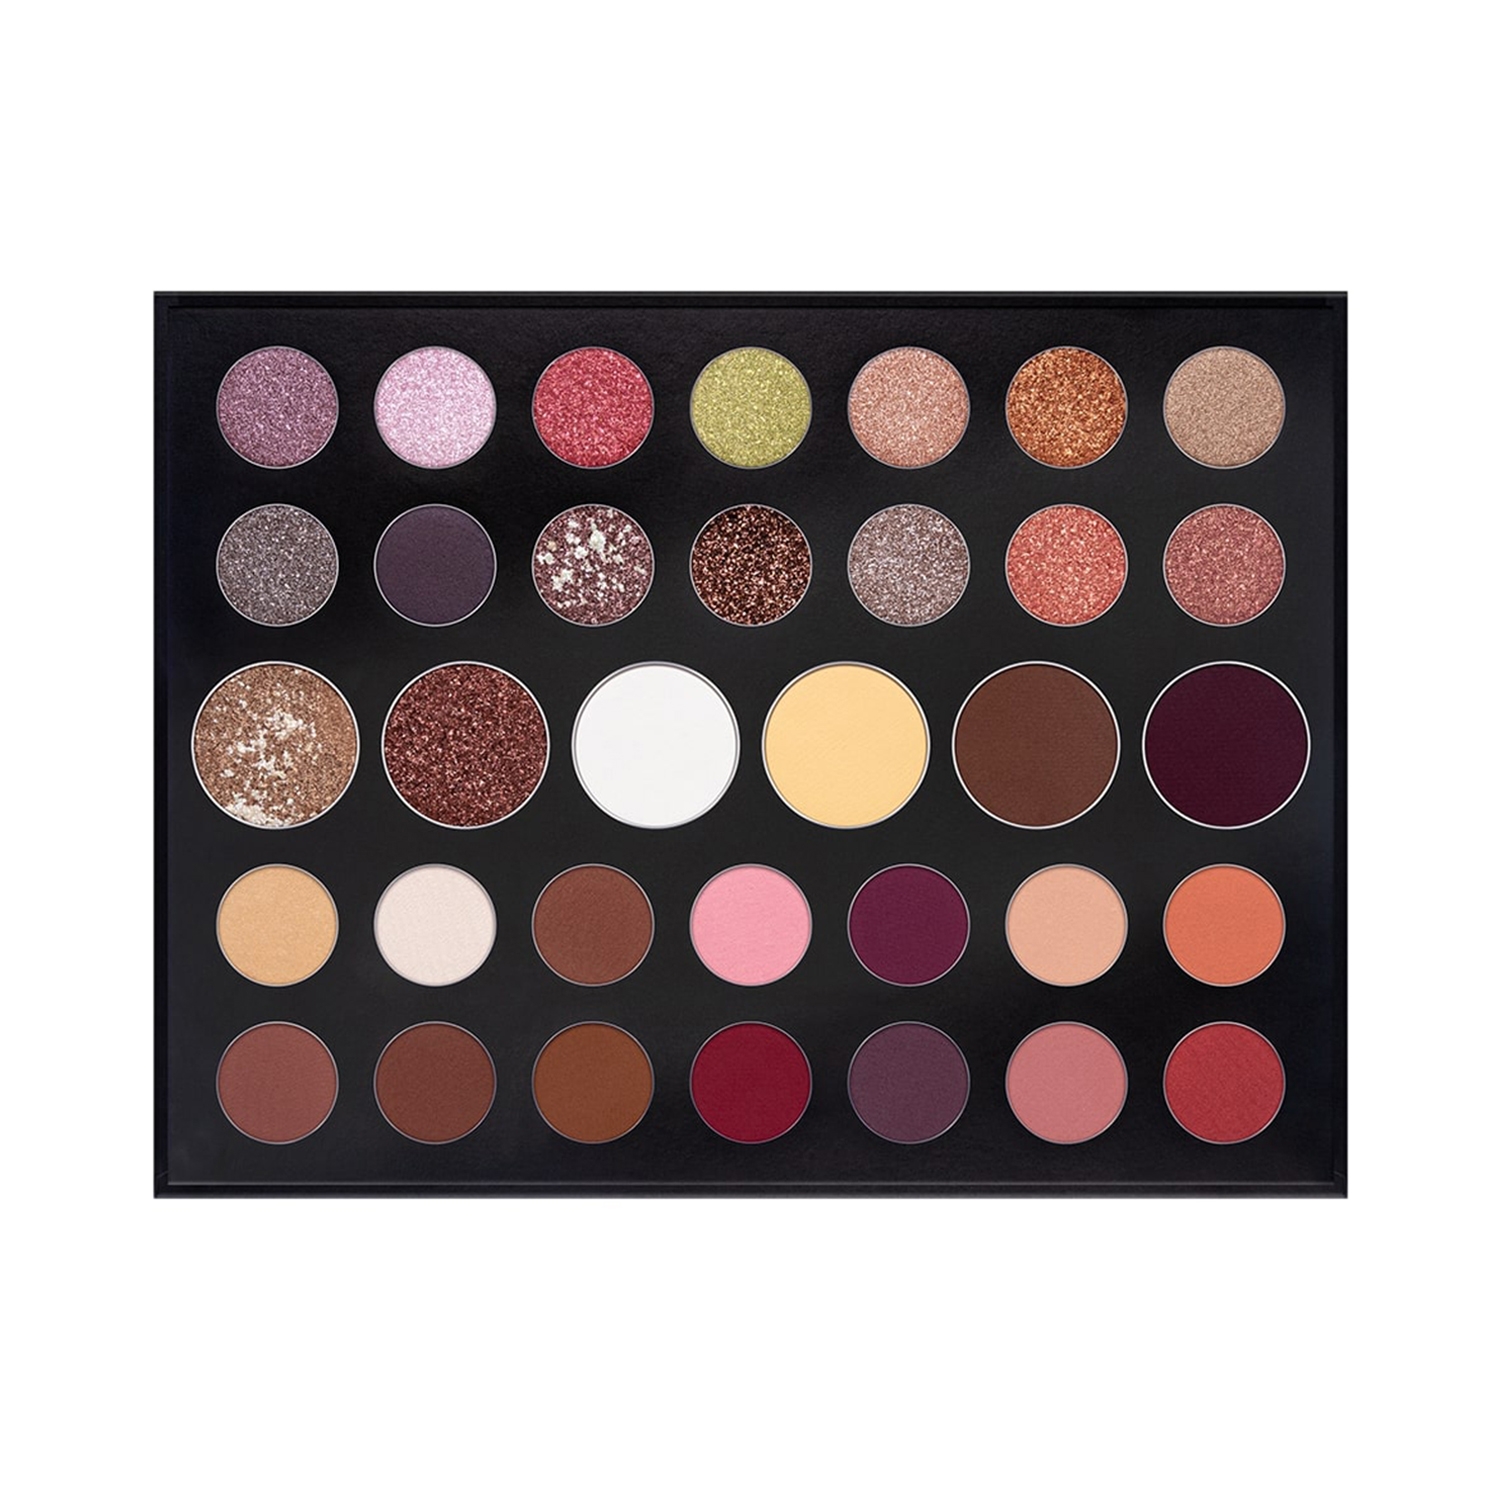 Daily Life Forever52 | Daily Life Forever52 Infinite 34 Color Eyeshadow Palette IEB003 - Multi Color (70.2g)